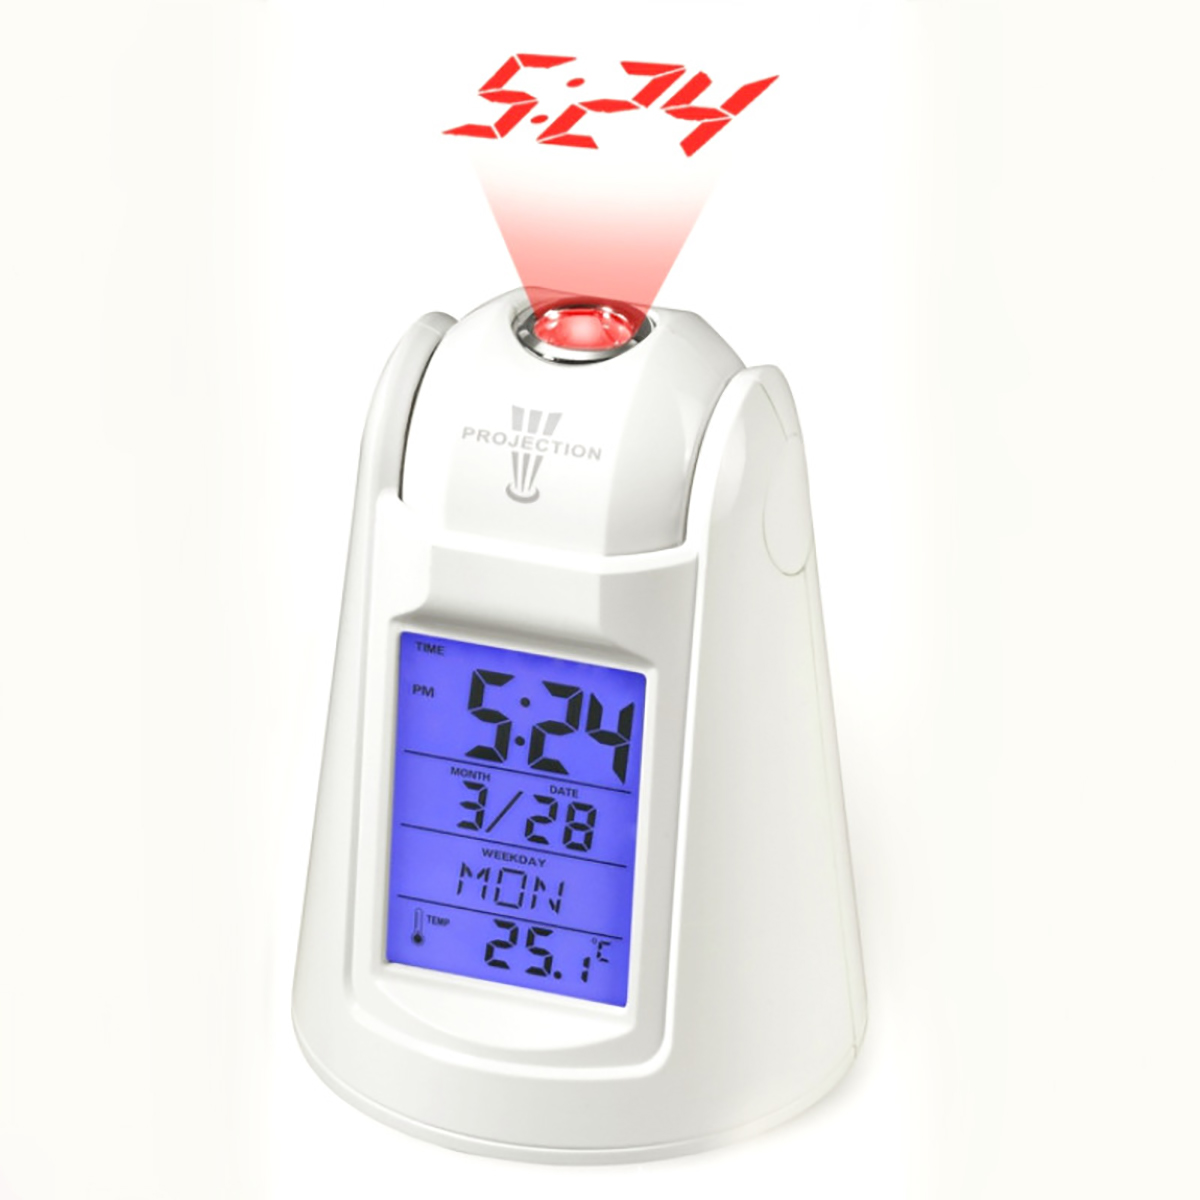 LED-Projection-Alarm-Clock-Thermometer-Snooze-Voice-Timing-Nightlight-Kids-Wake-1709073-2